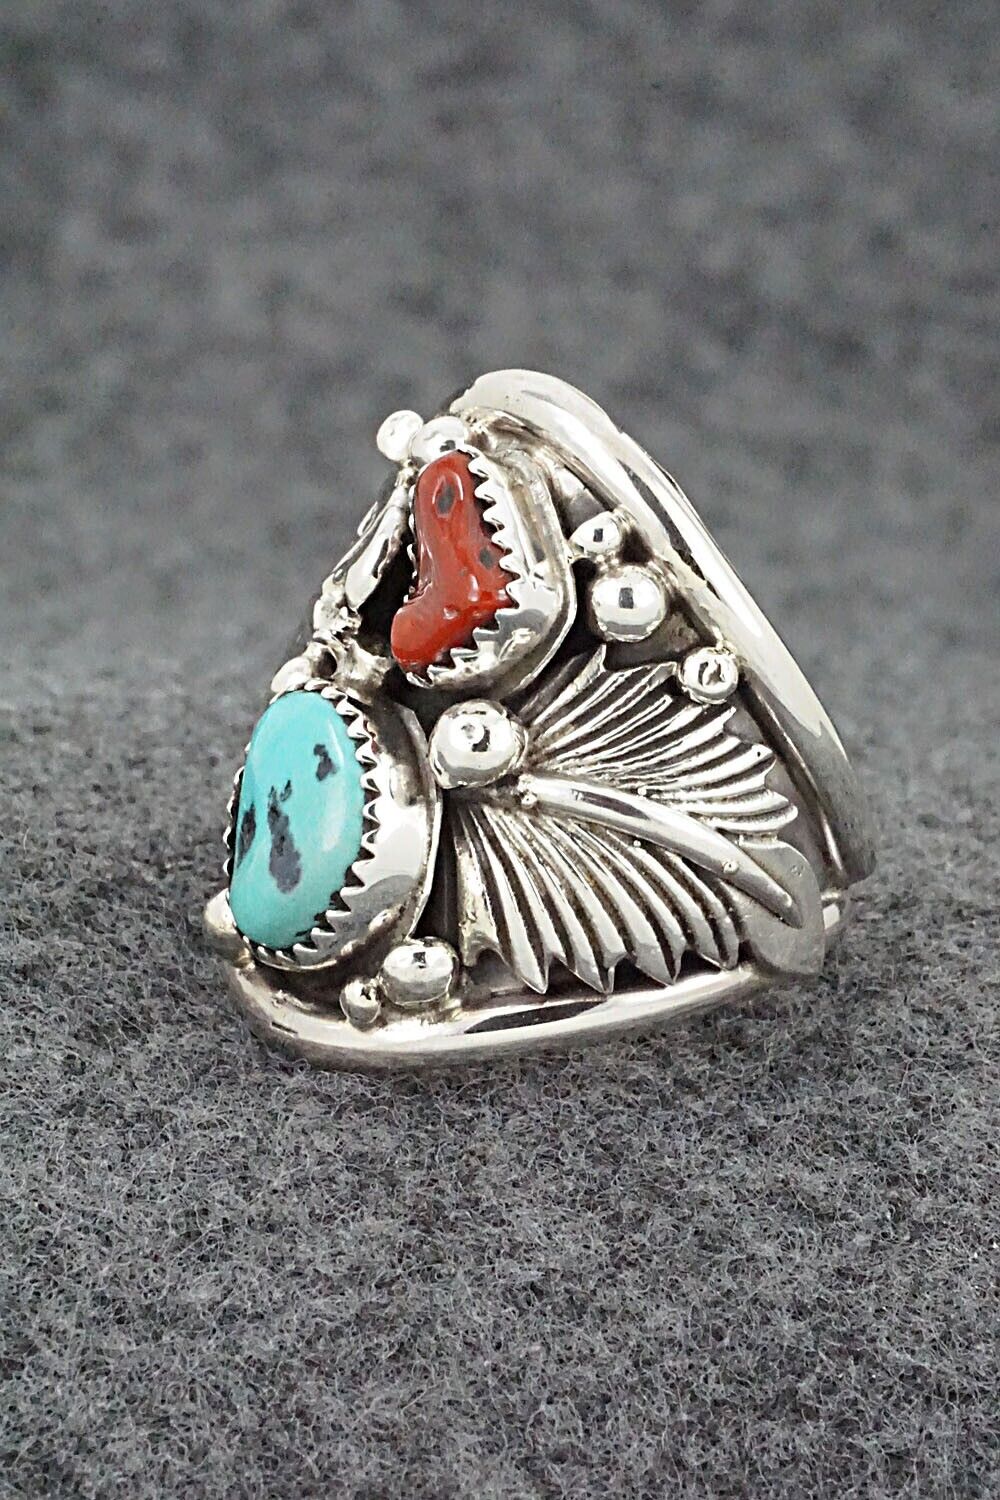 Turquoise, Coral & Sterling Silver Ring - Jeannette Saunders - Size 9.75